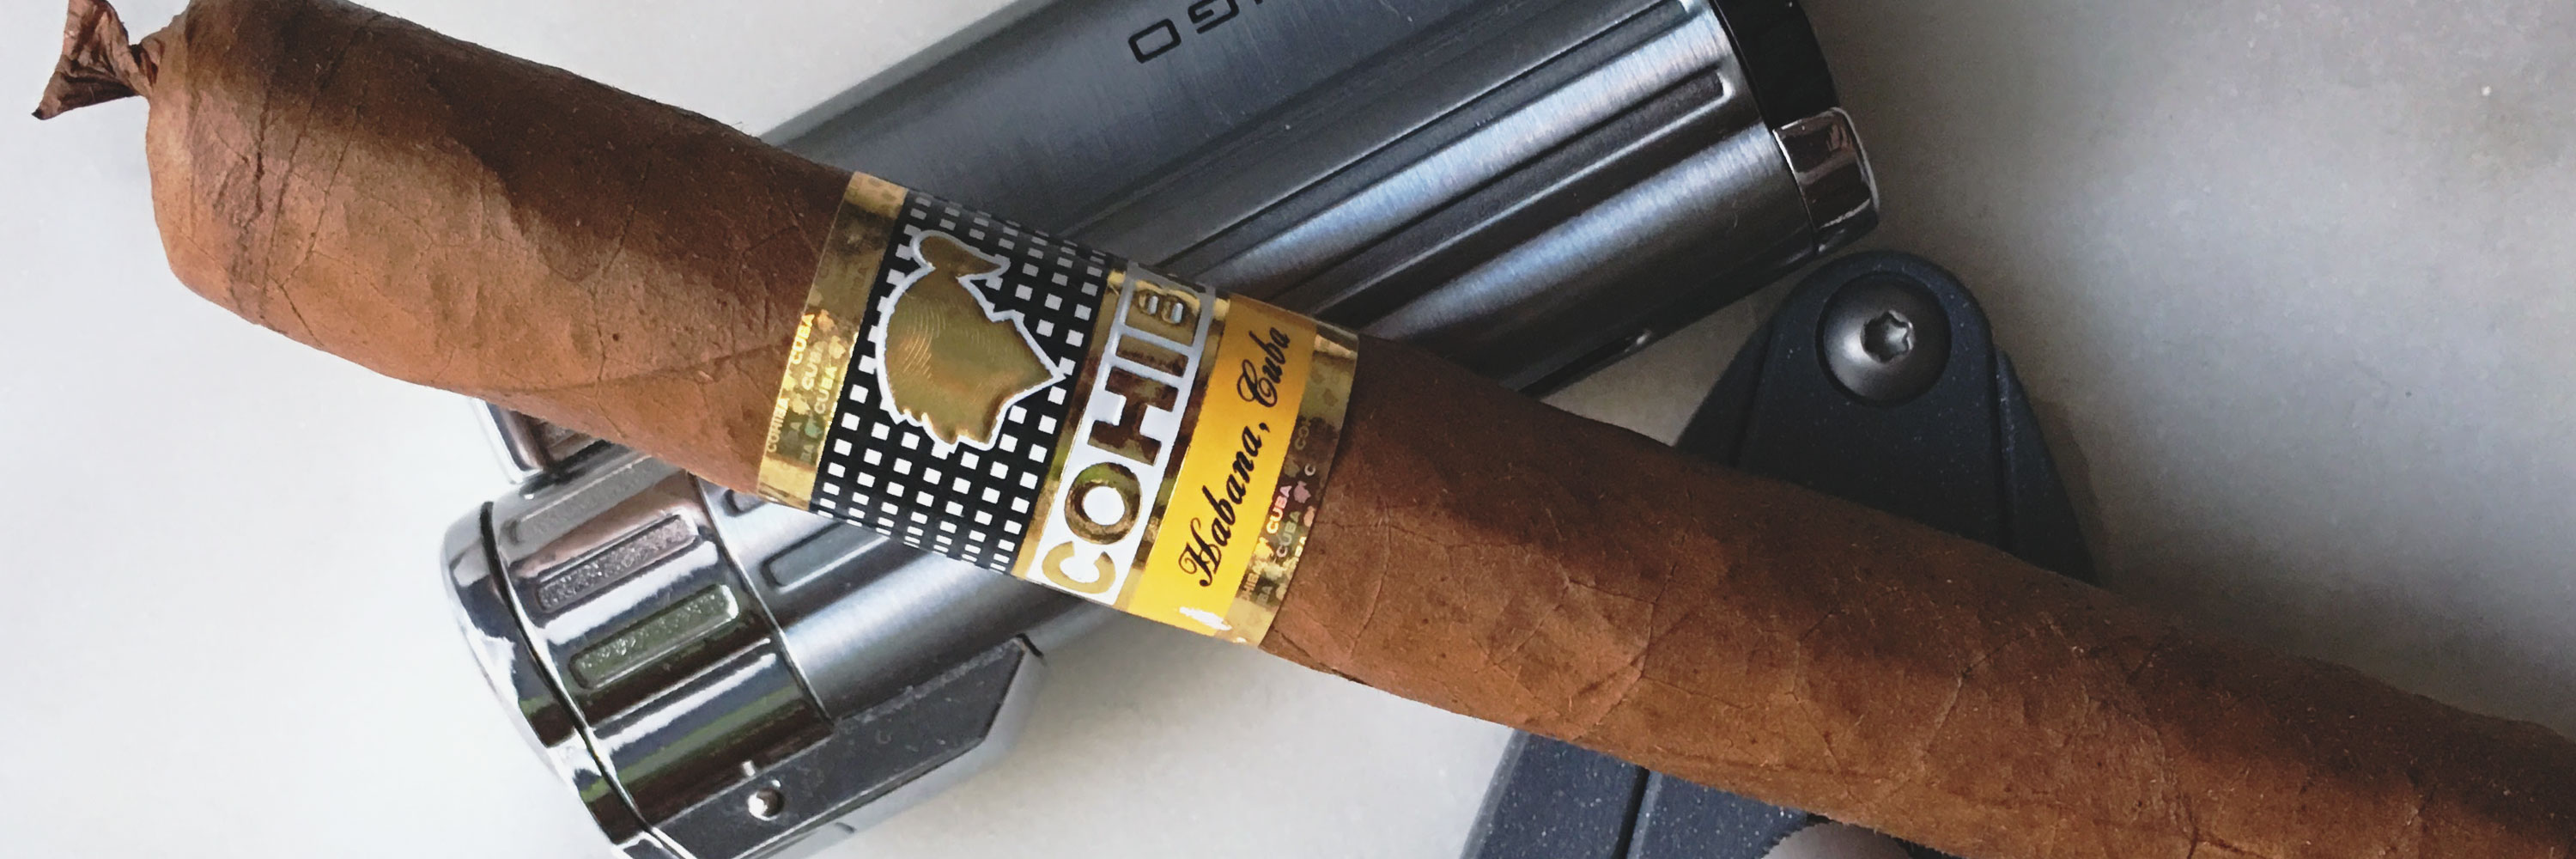 cohiba cigar with lighter and cutter